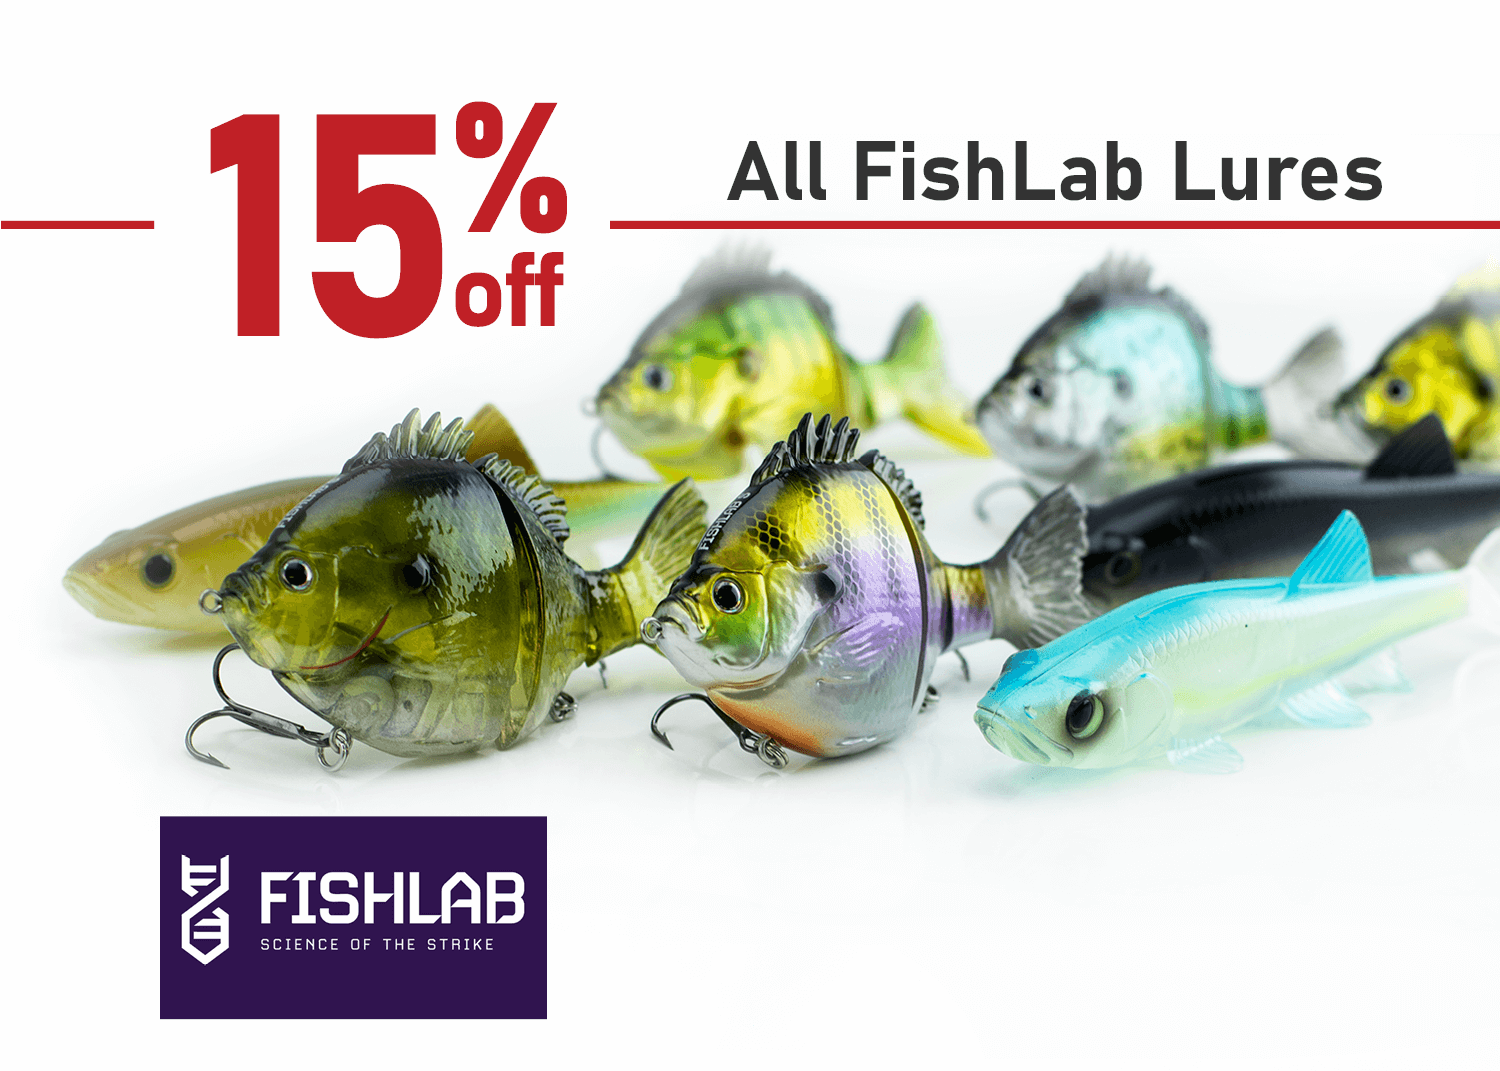 Save 15% on all FishLab Lures